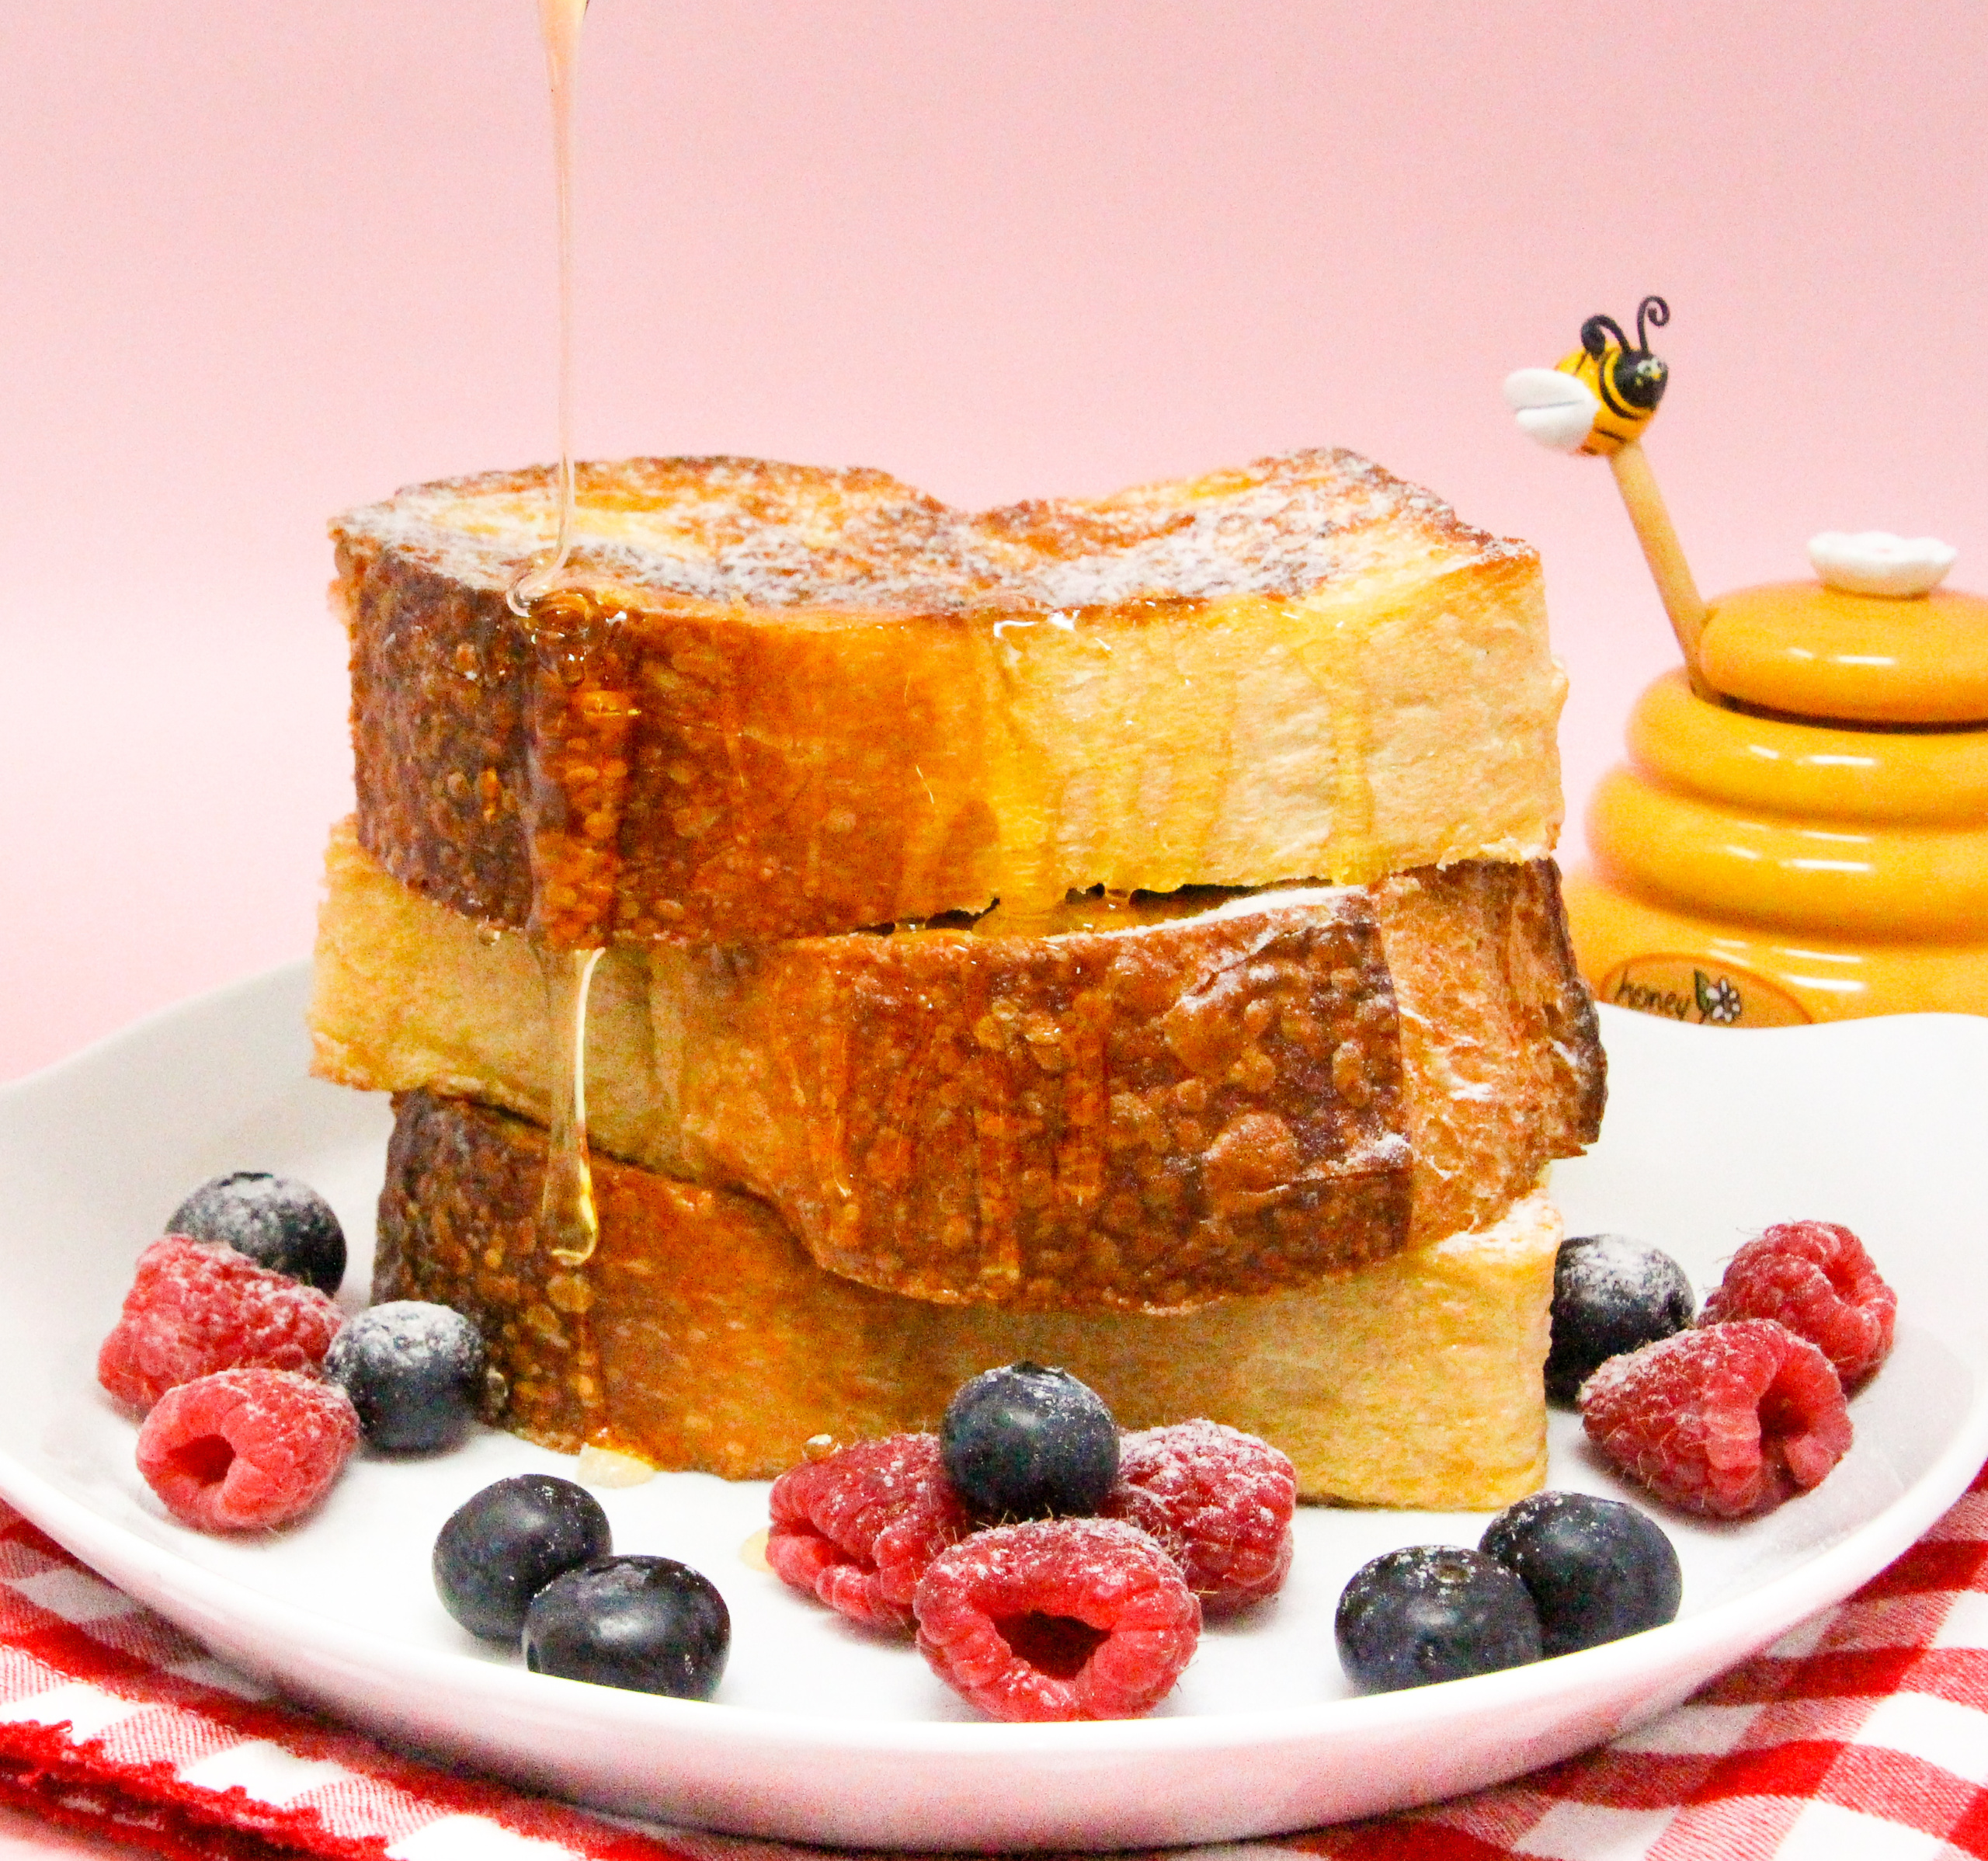 Honey-Ricotta-Stuffed French Toast starts with thick slabs of French bread then stuffed with a ricotta-based filling lightly sweetened with honey and a liberal amount of lemon zest for a tart tang. Recipe shared with permission granted by Jennie Marts, author of KILL OR BEE KILLED. 